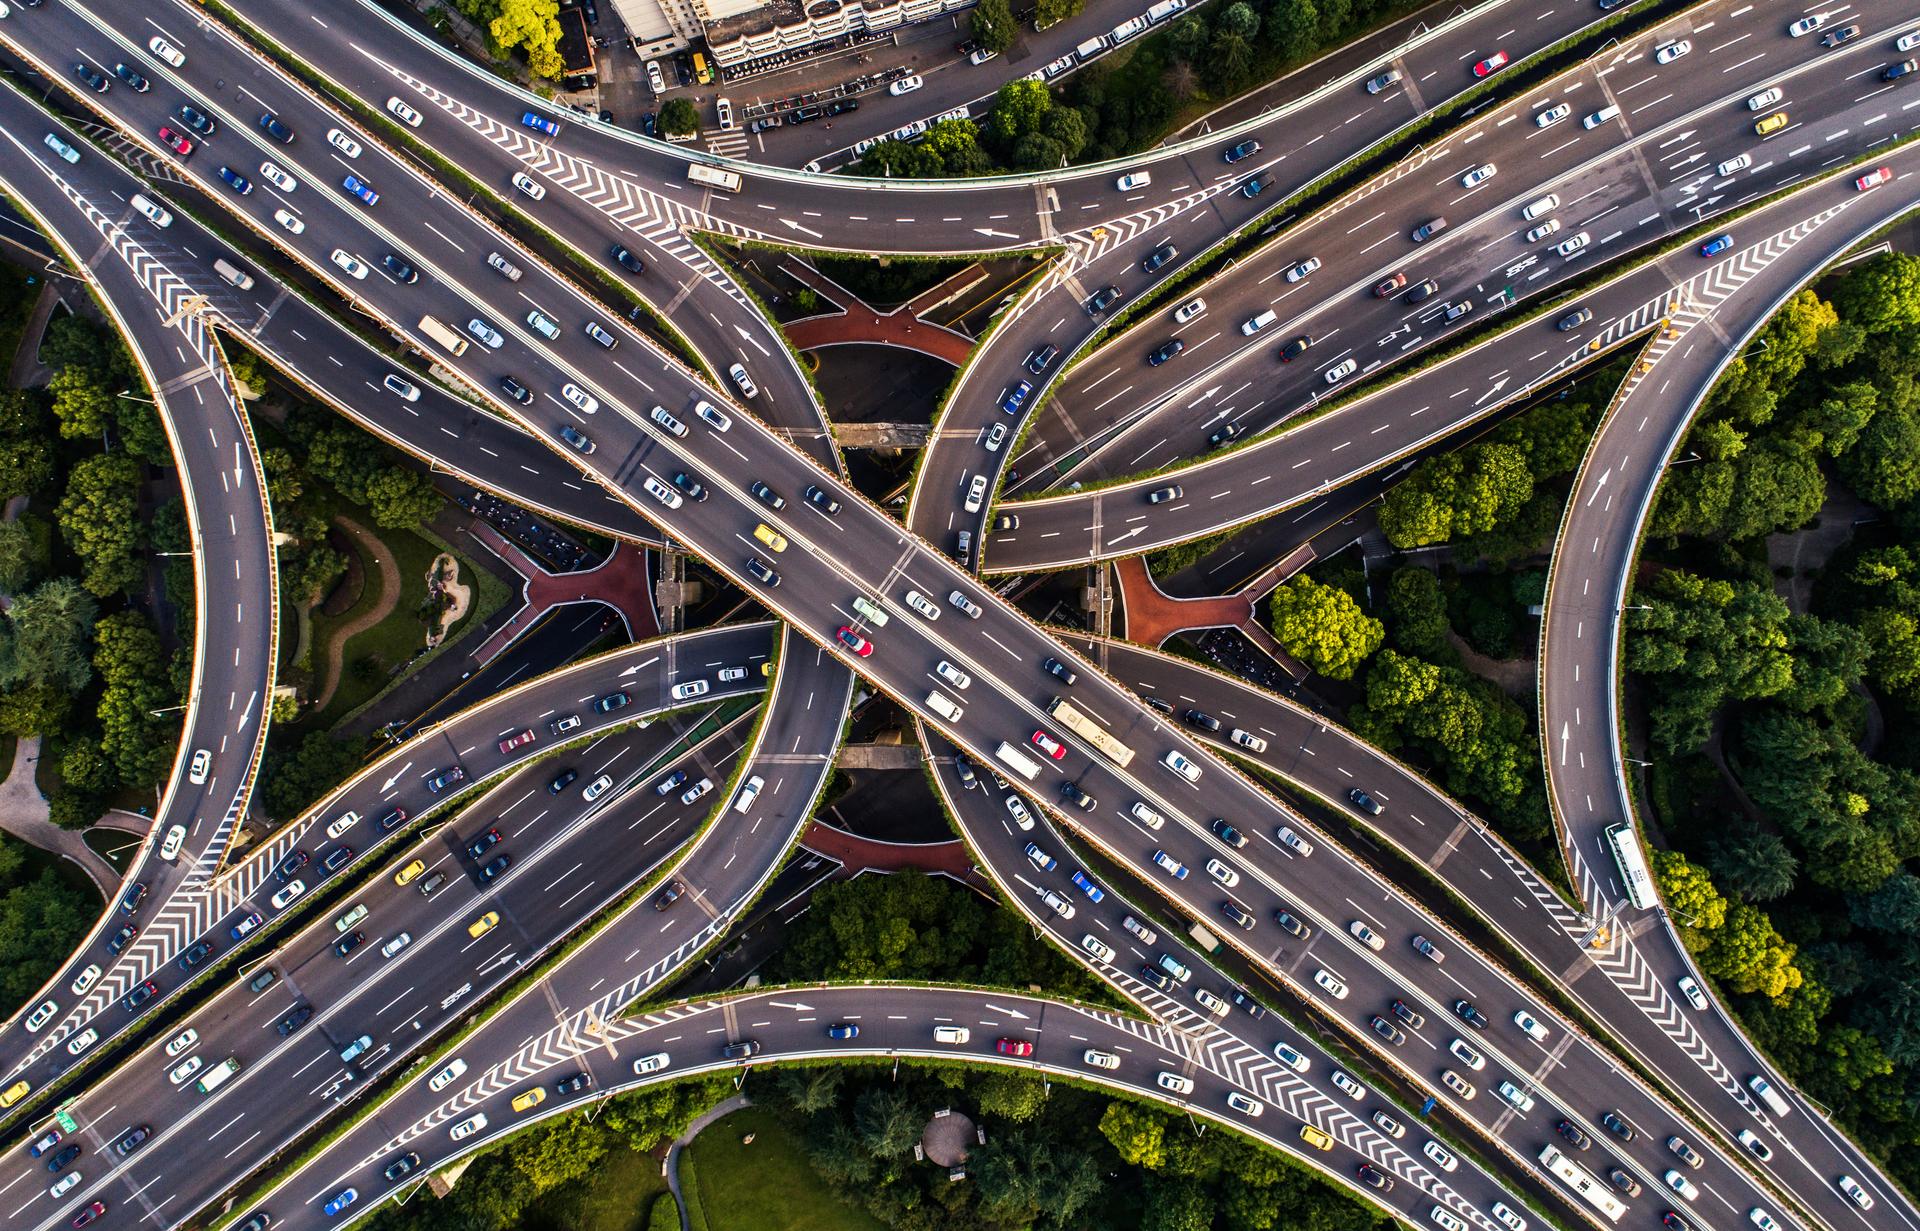 A photo of a busy highway from an aerial perspective.